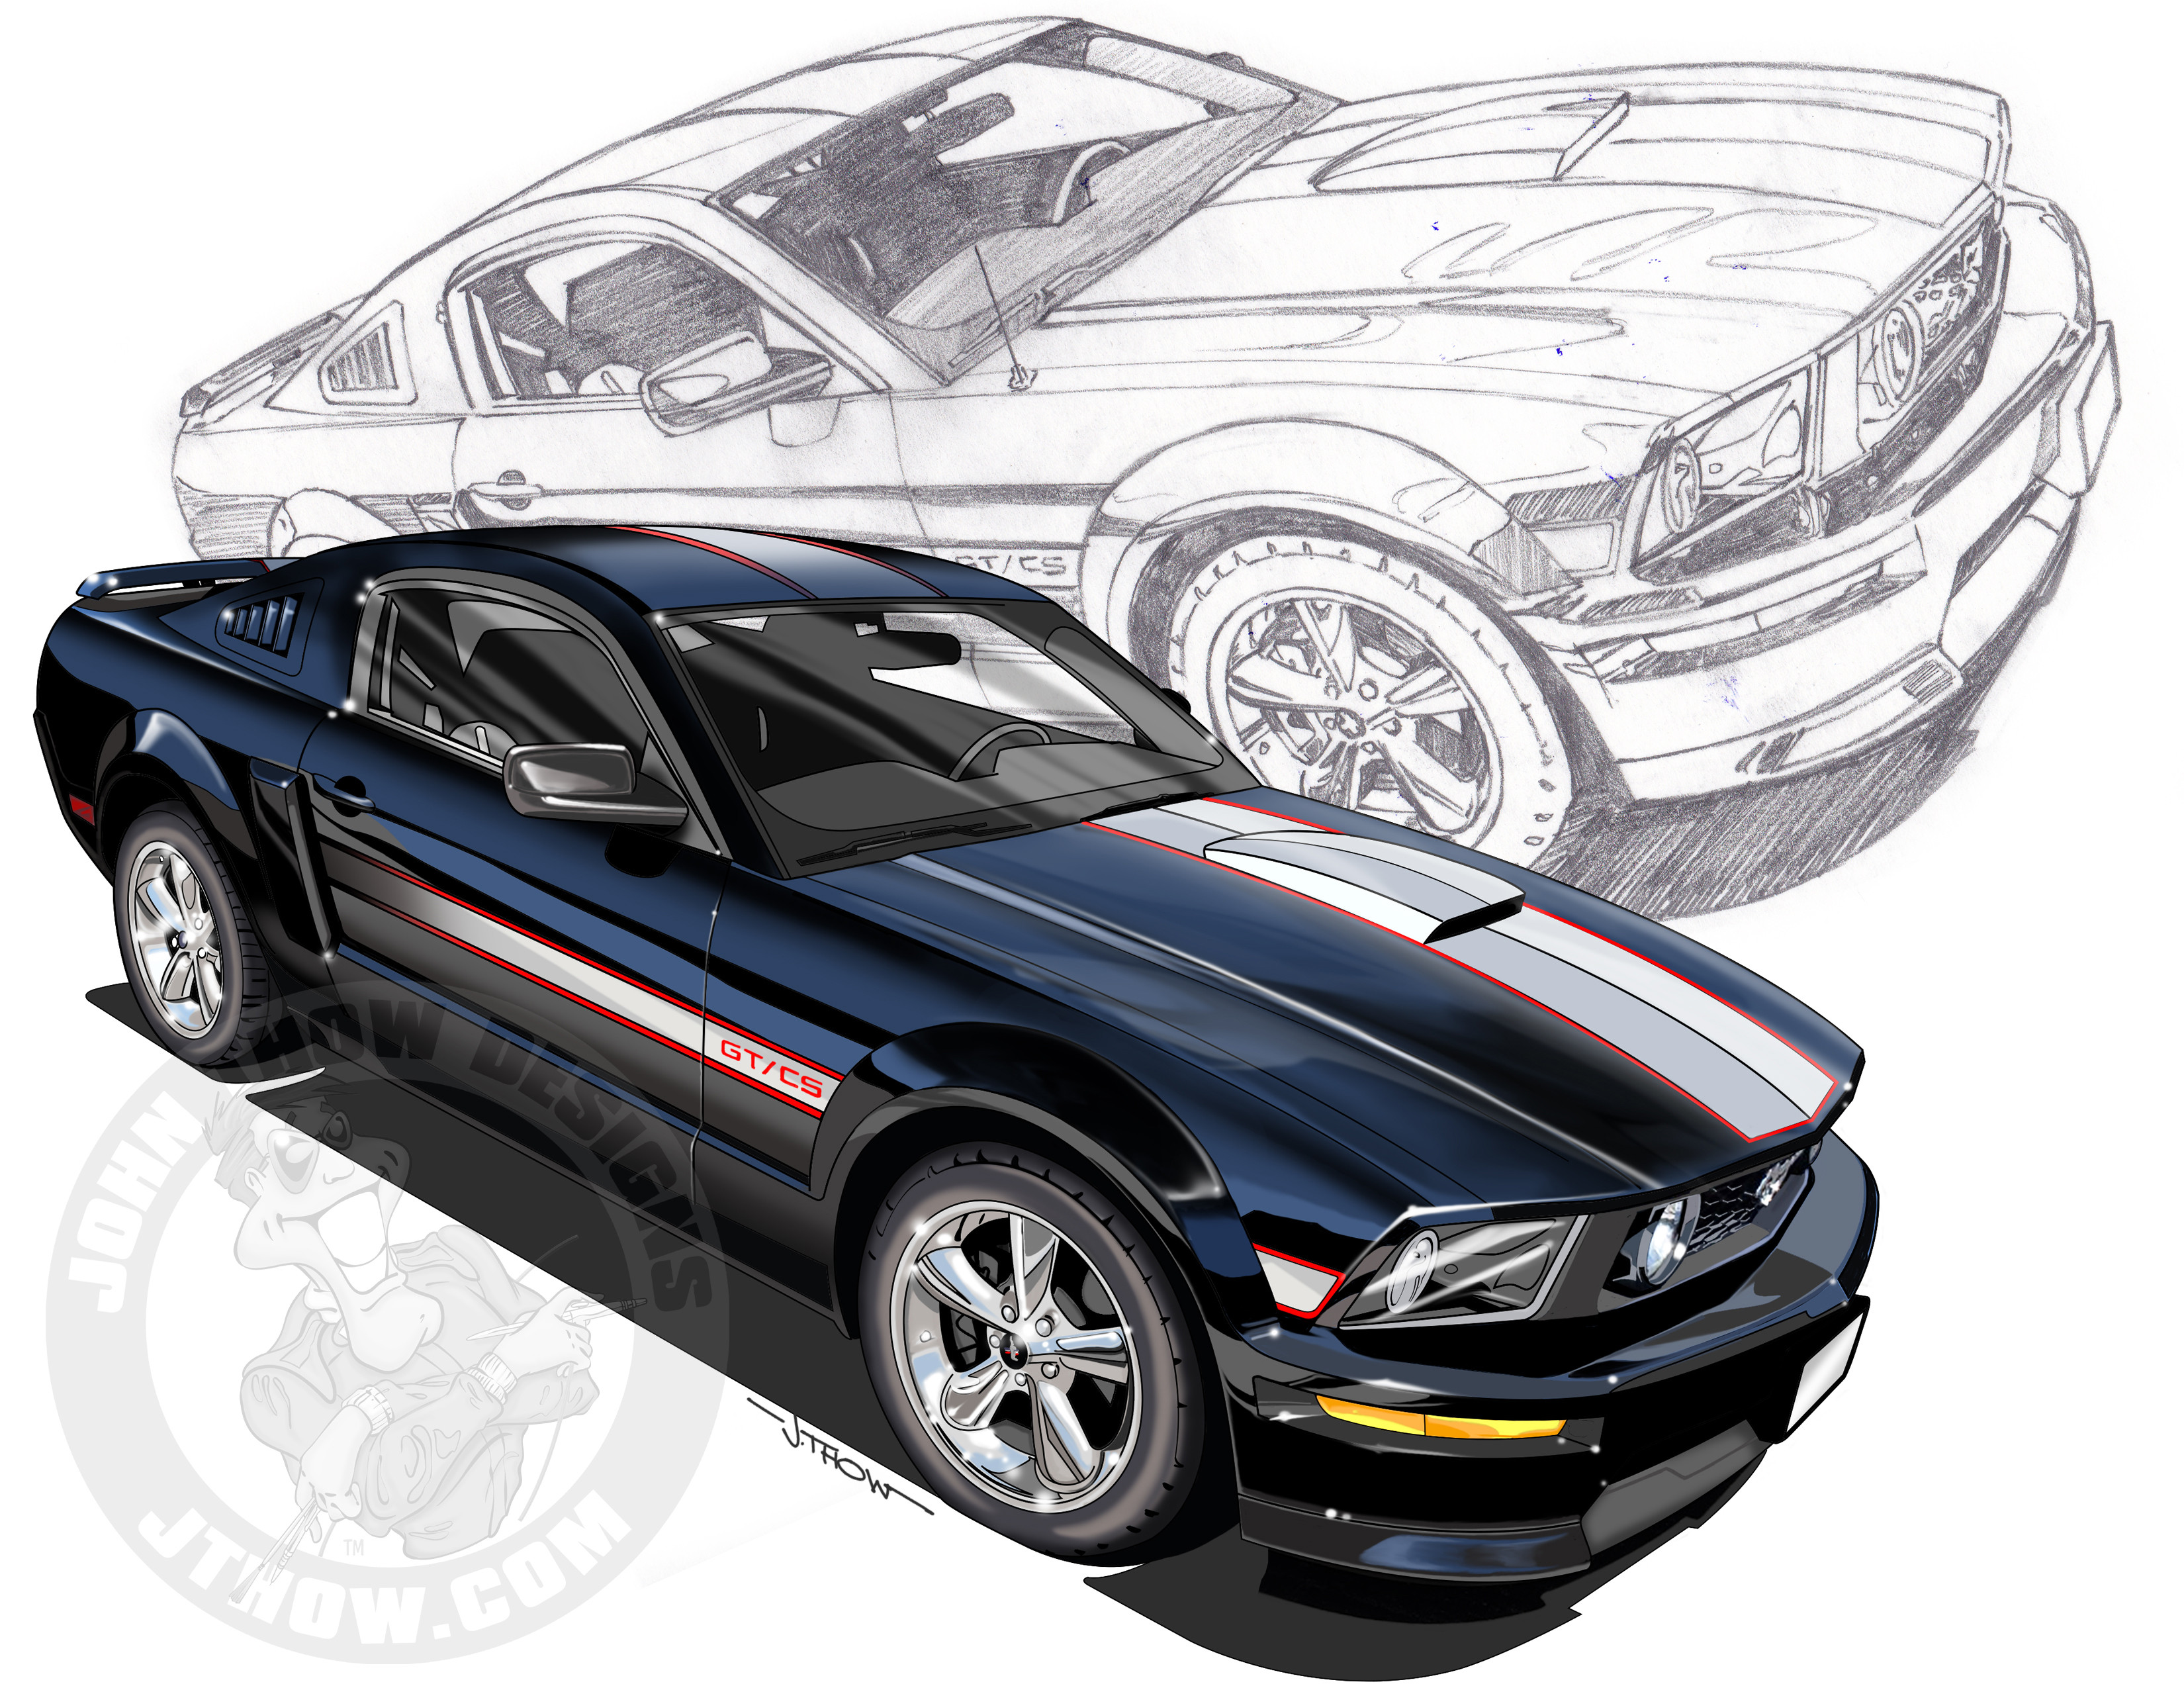 The original sketch and close up detail view of the Ford, Mustang GT from the 2022 Wheels N Windmills Car Show Art.